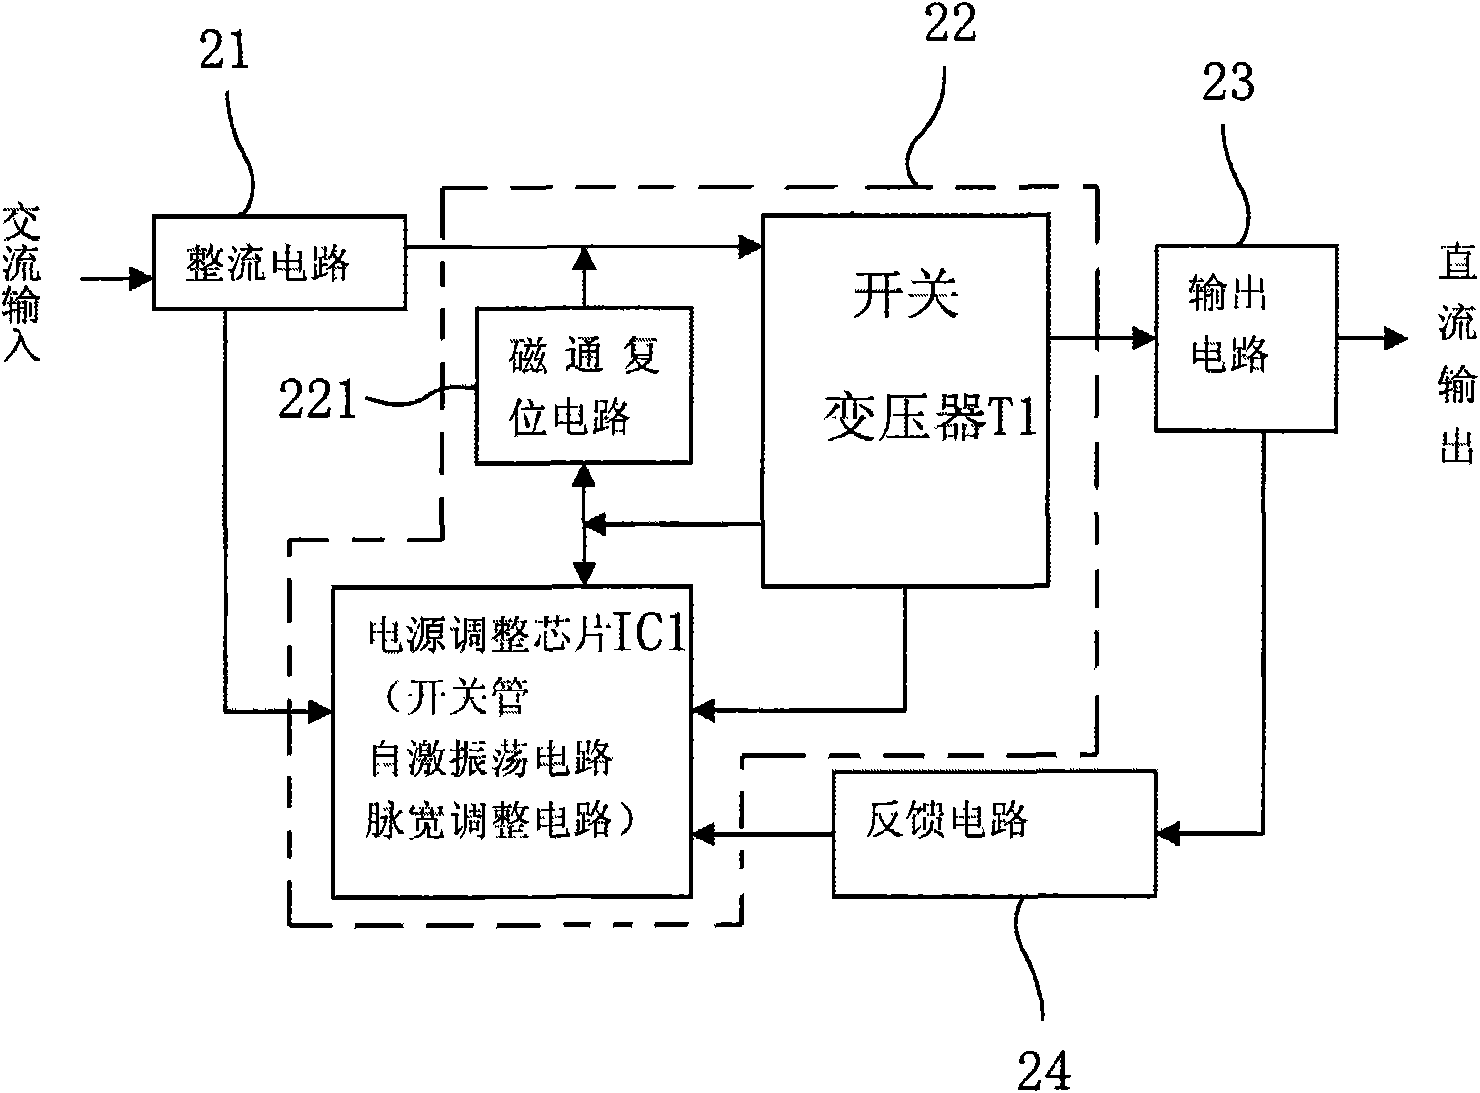 Alternating current power supply electronic clock with power saving structure